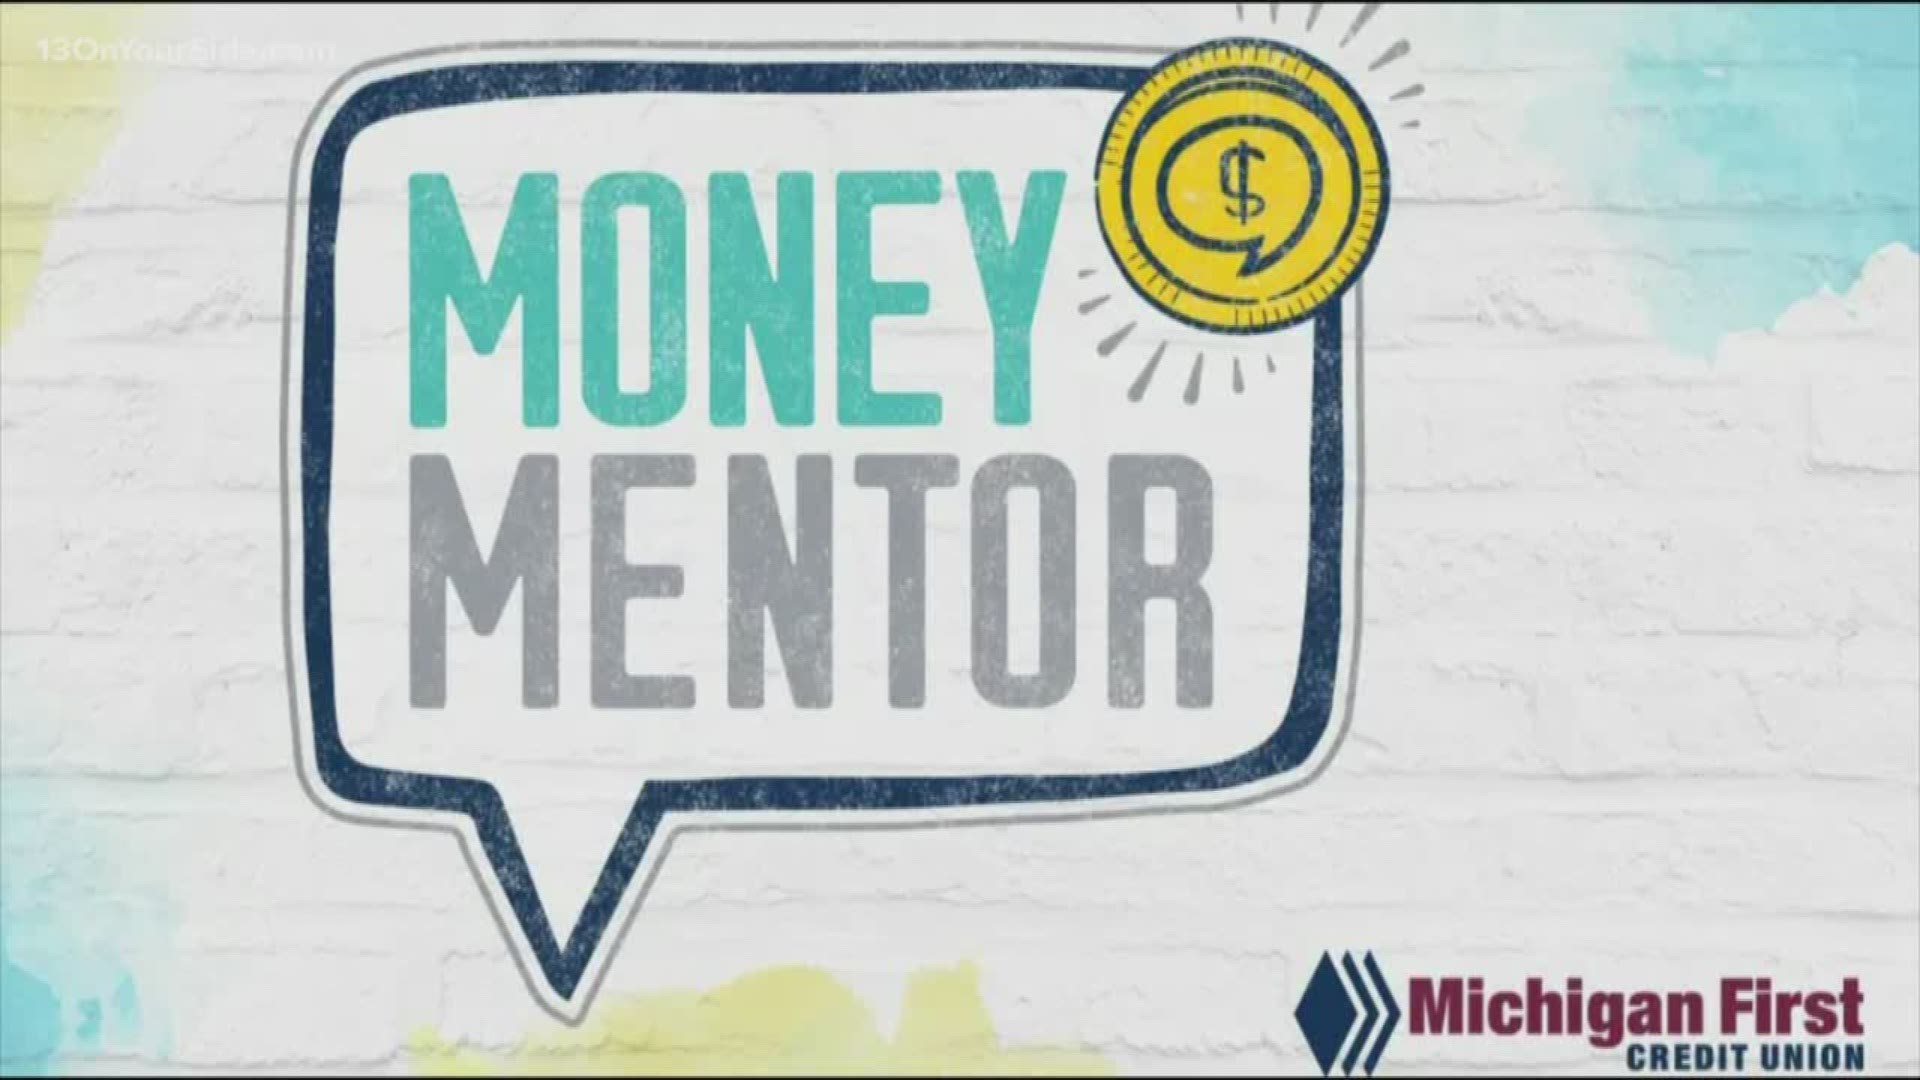 Michigan First Credit Union will begin offering free Money Mentor classes to area youths. A target demographic of 17- to 25-year-olds will be able to learn how to better manage their money and build credit via in-person group presentations, blog posts, videos and social media content.